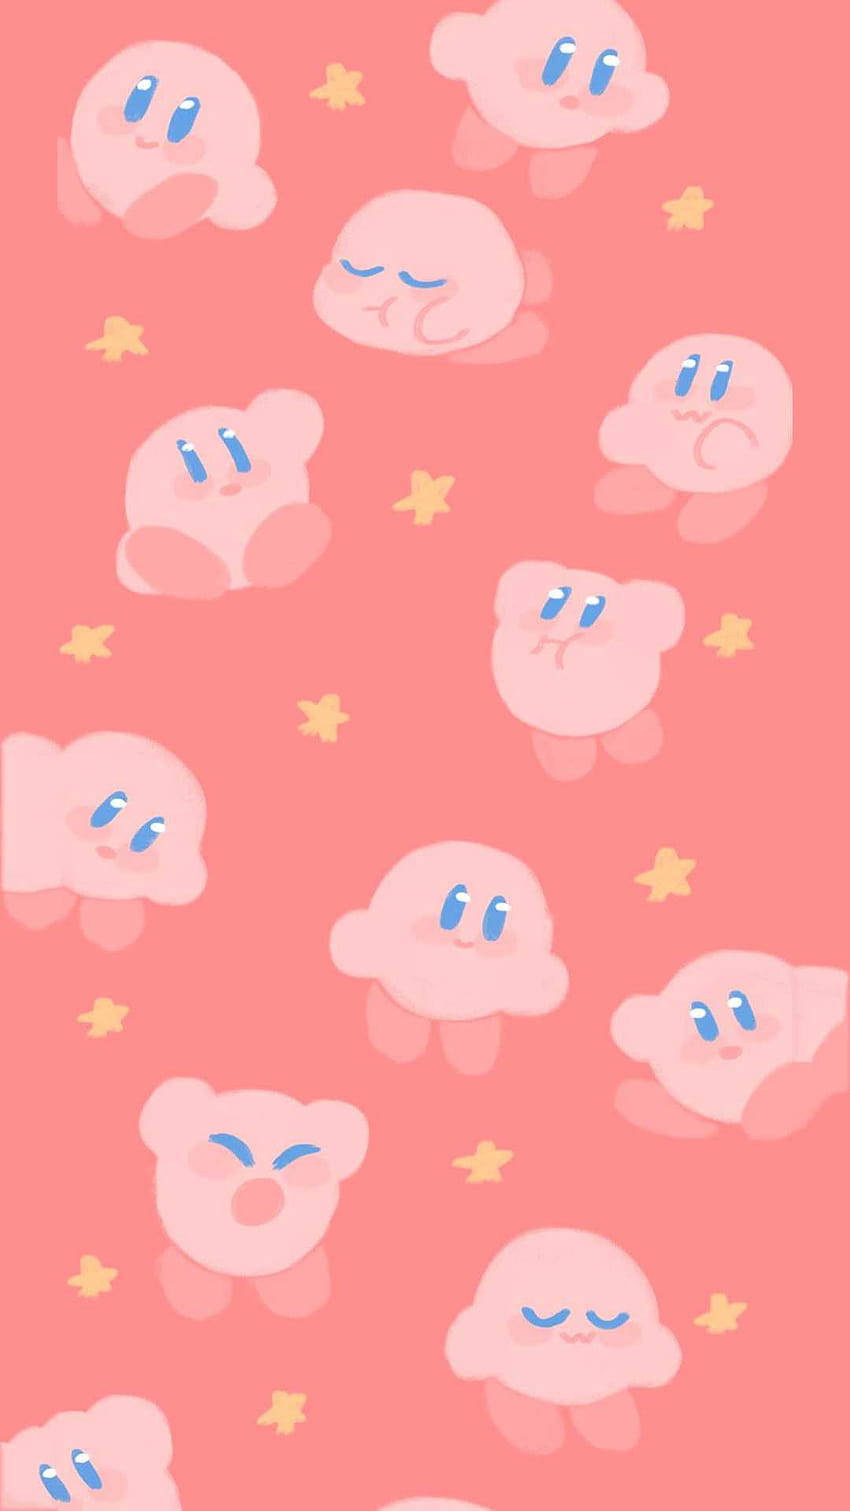 Kirby Phone Wallpaper  Mobile Abyss